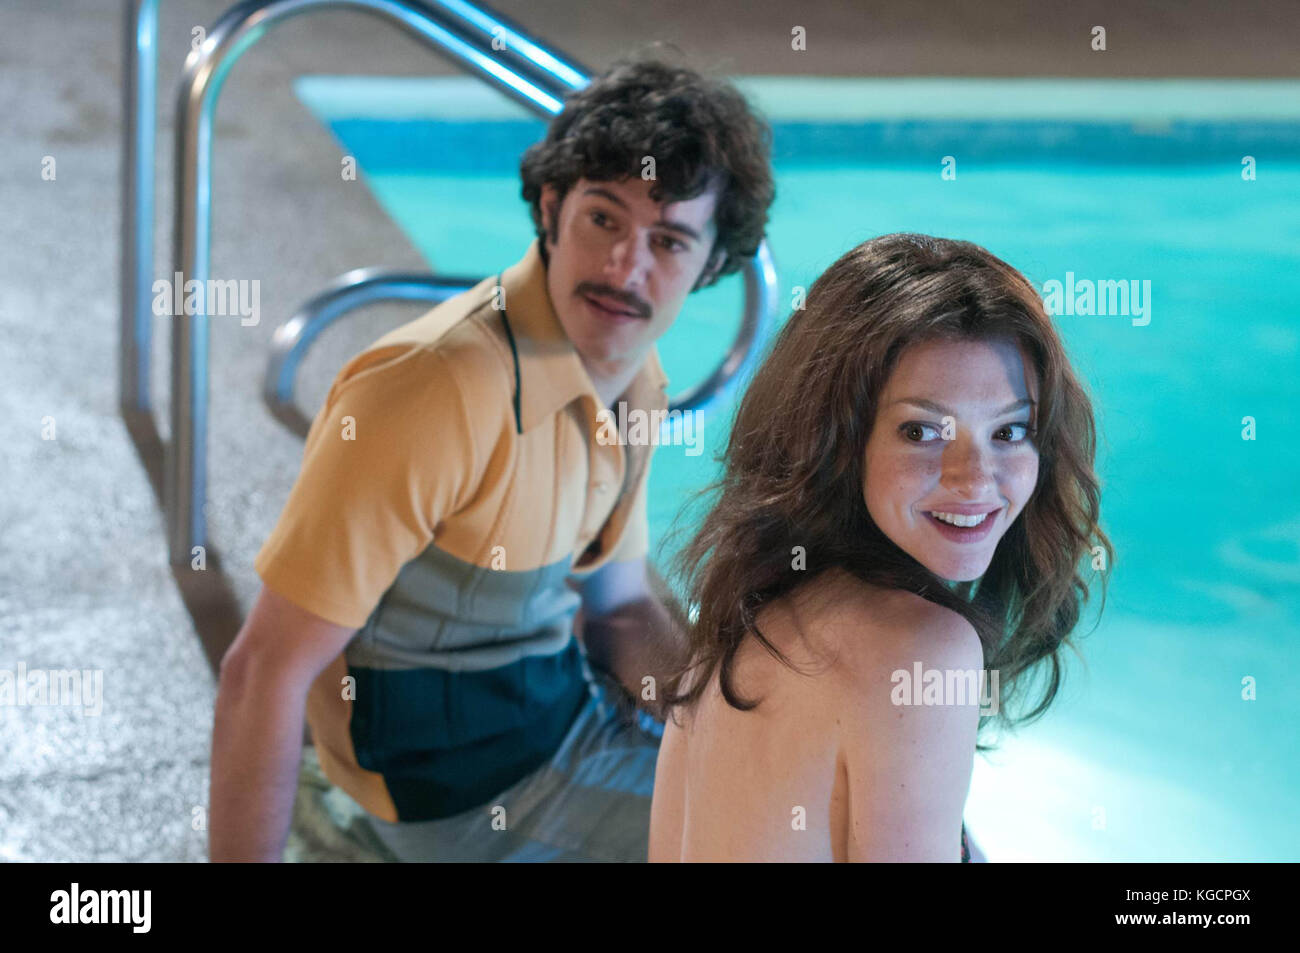 Adam Brody High Resolution Stock Photography And Images Alamy